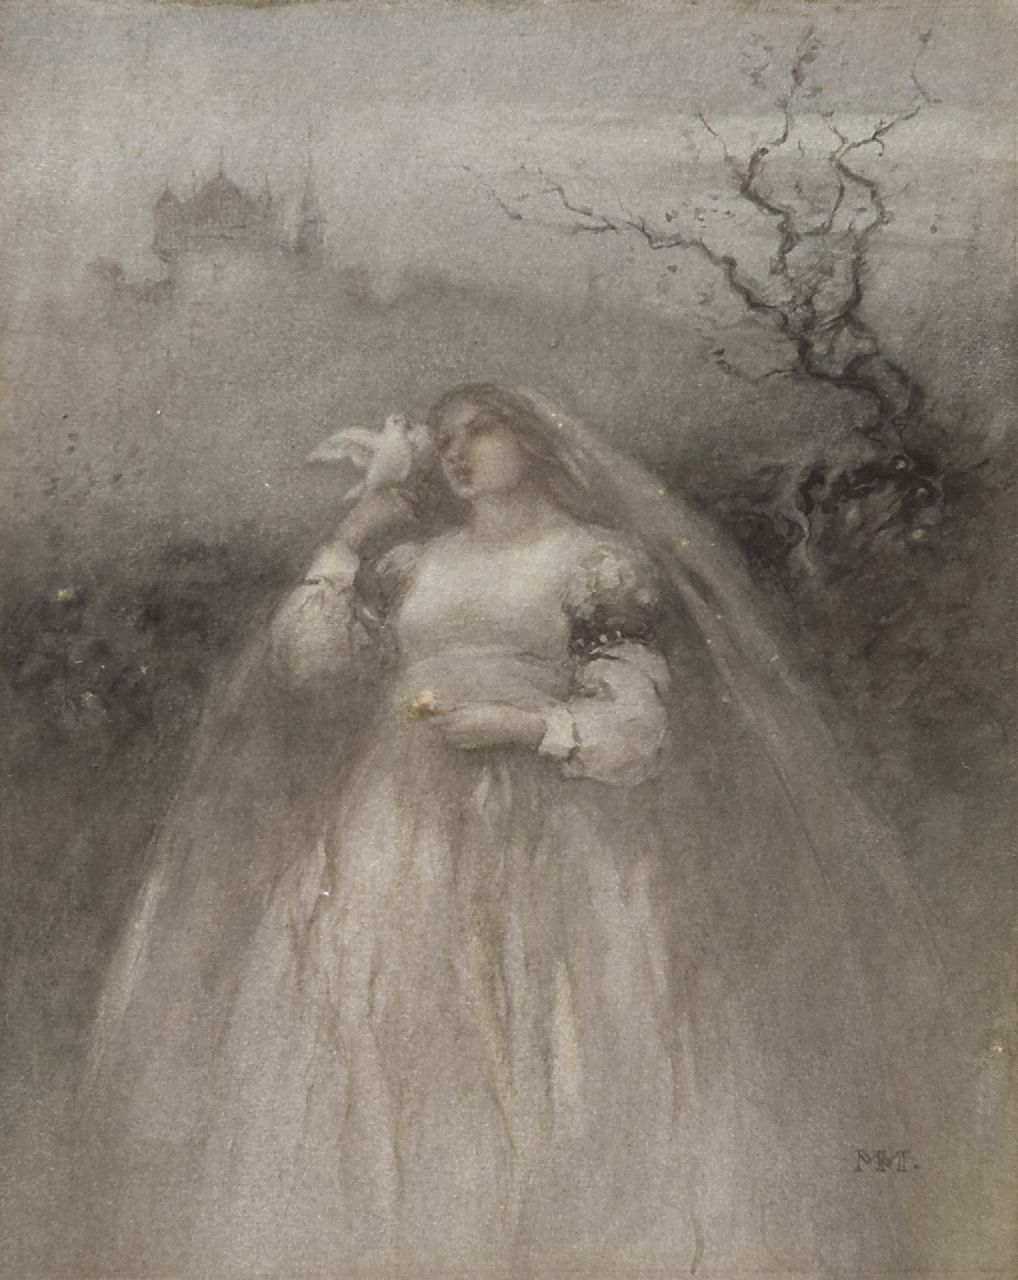 Maris M.  | Matthijs 'Thijs' Maris, The young bride, watercolour on paper 27.7 x 22.3 cm, signed l.r. with monogram and painted ca. 1875-1876